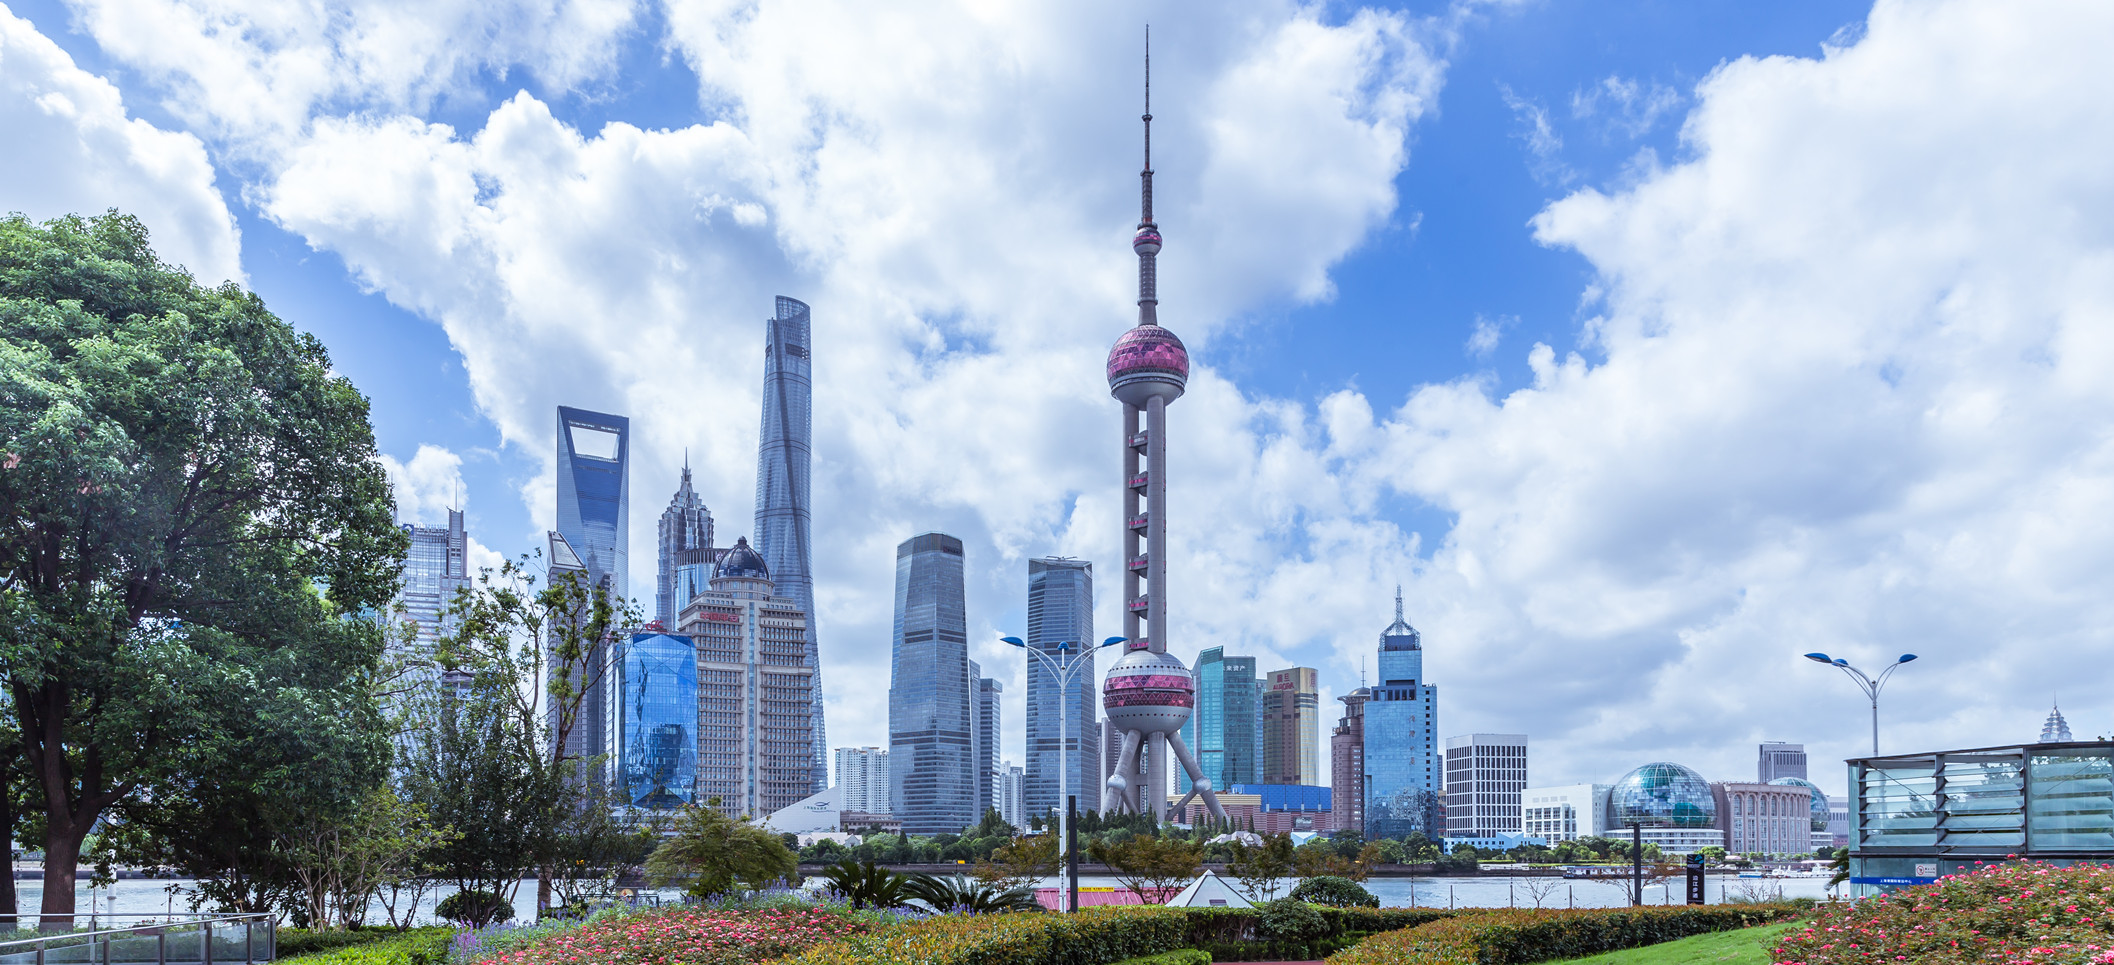 Shanghai plans huge boost for its service sector